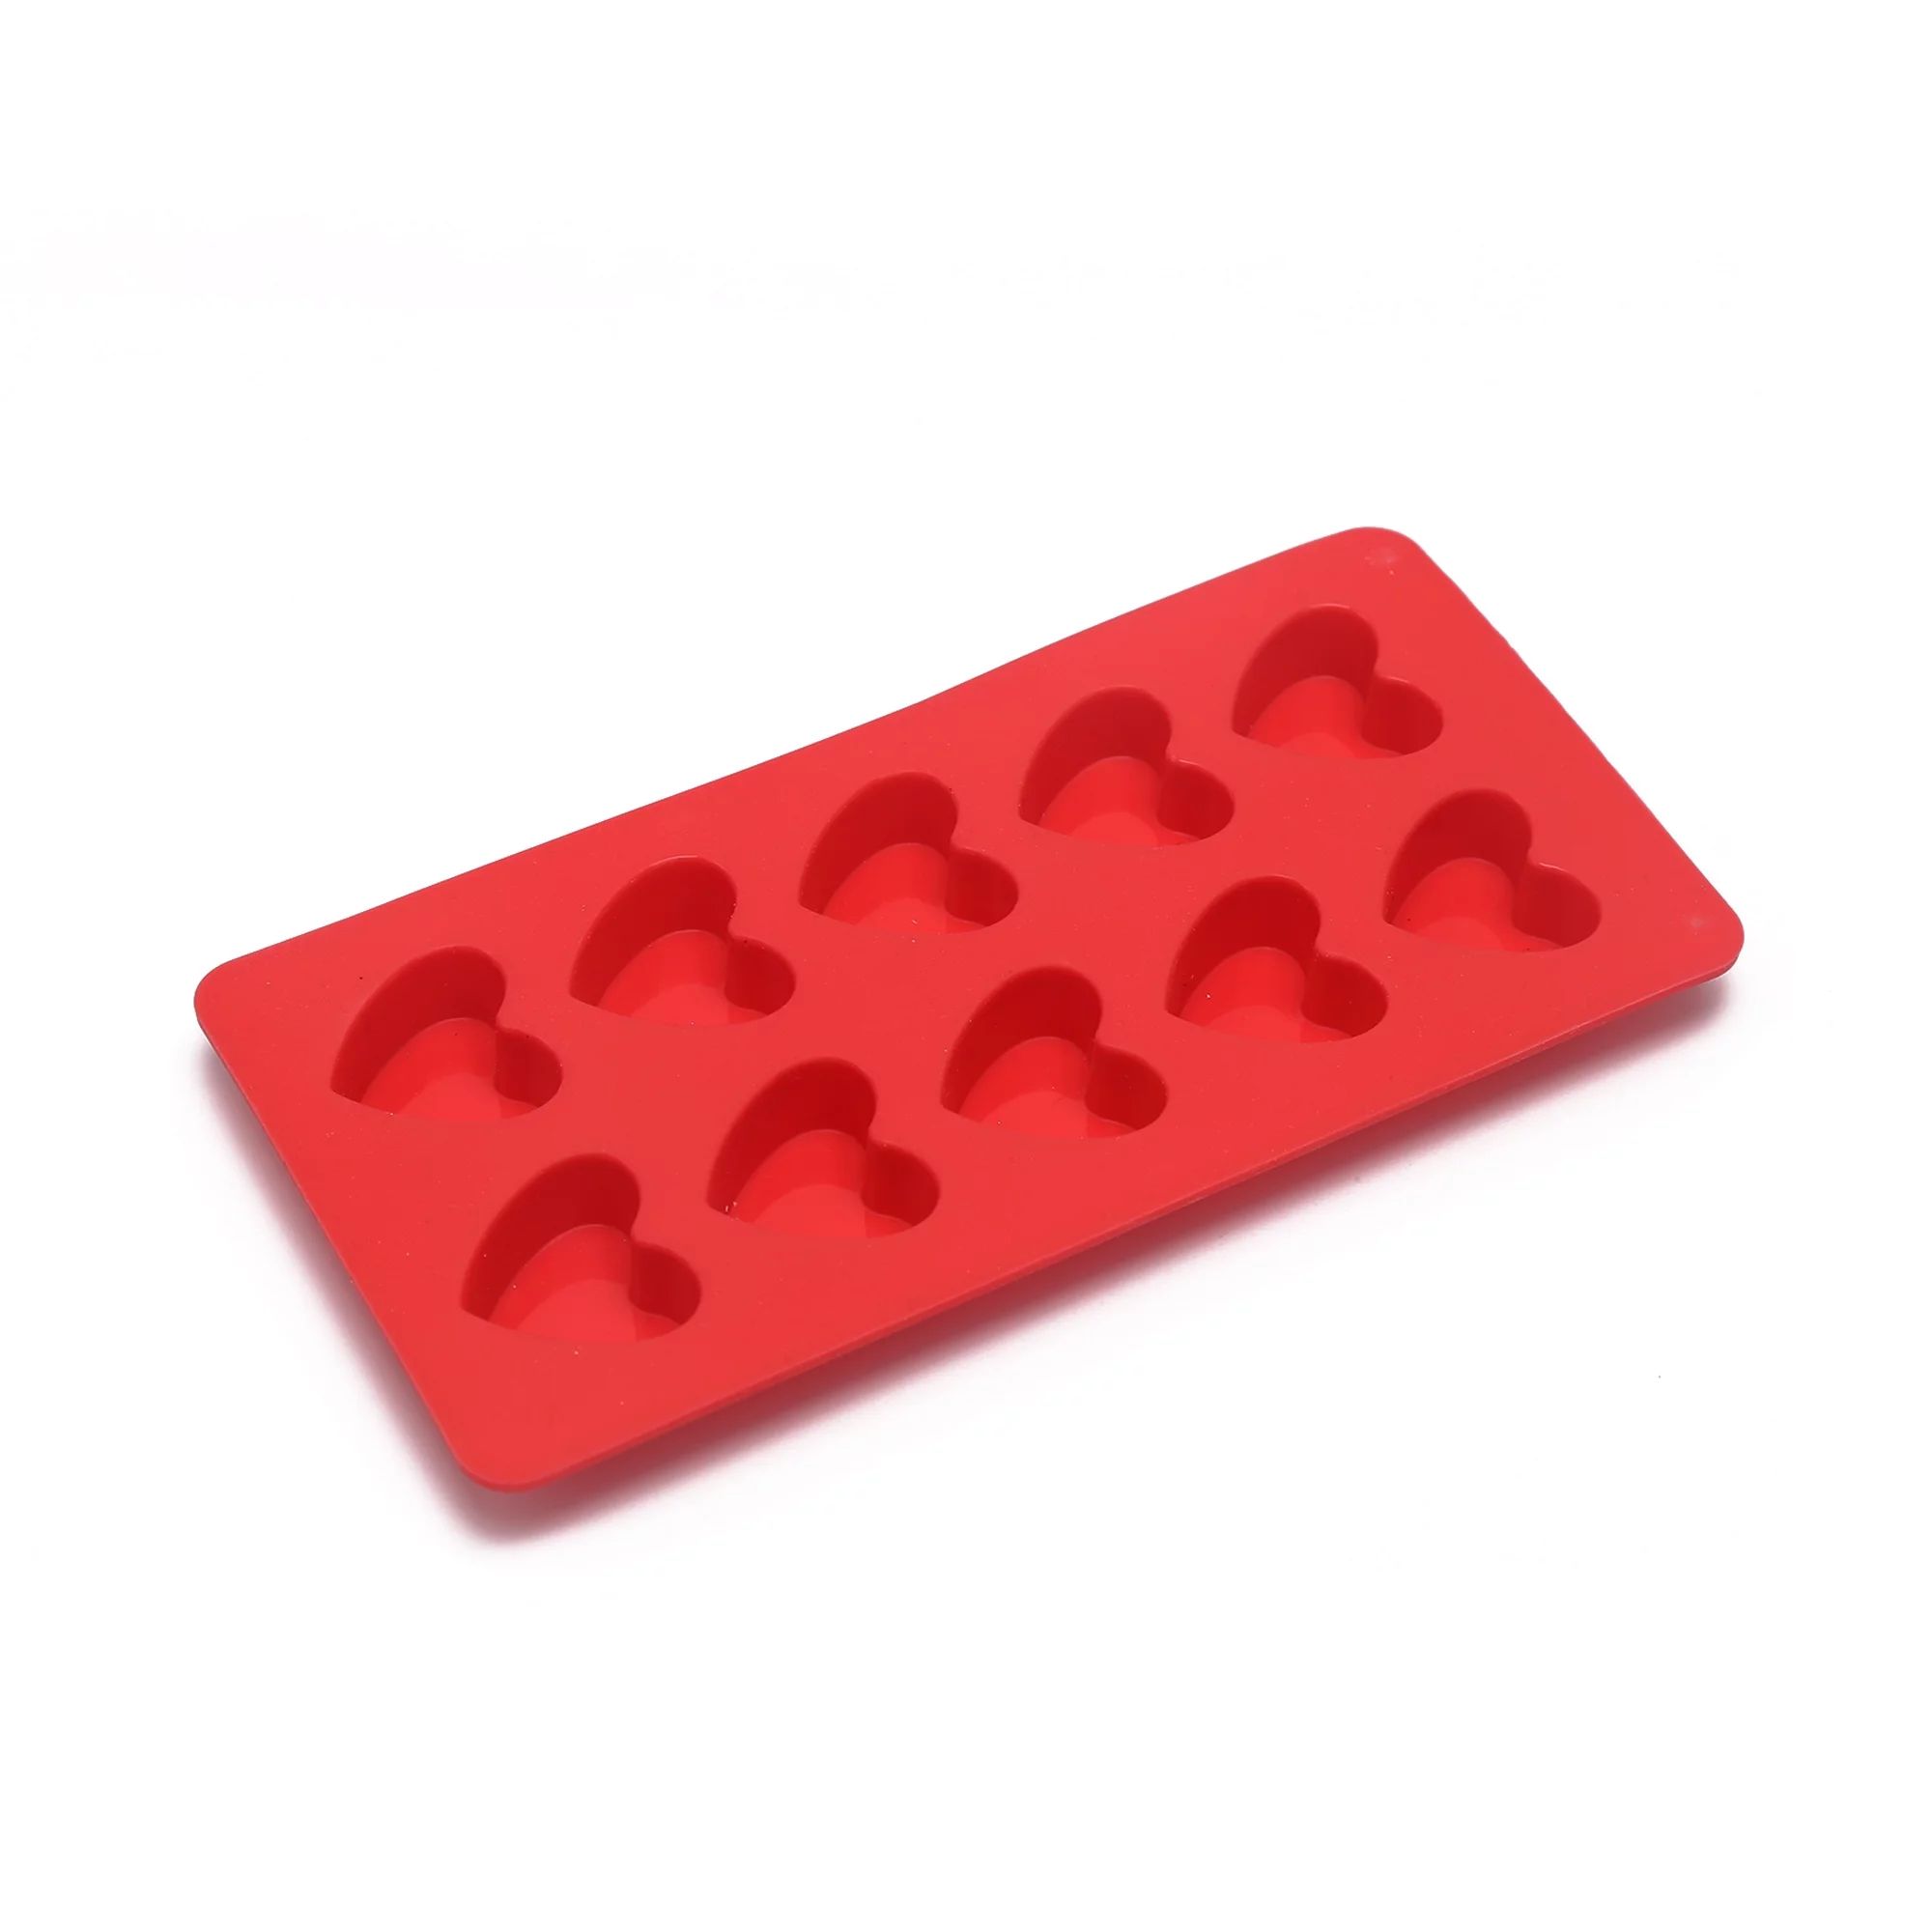 Way to Celebrate Heart Silicone Mold, Red, Baking, Non-Stick, 1 Piece | Walmart (US)